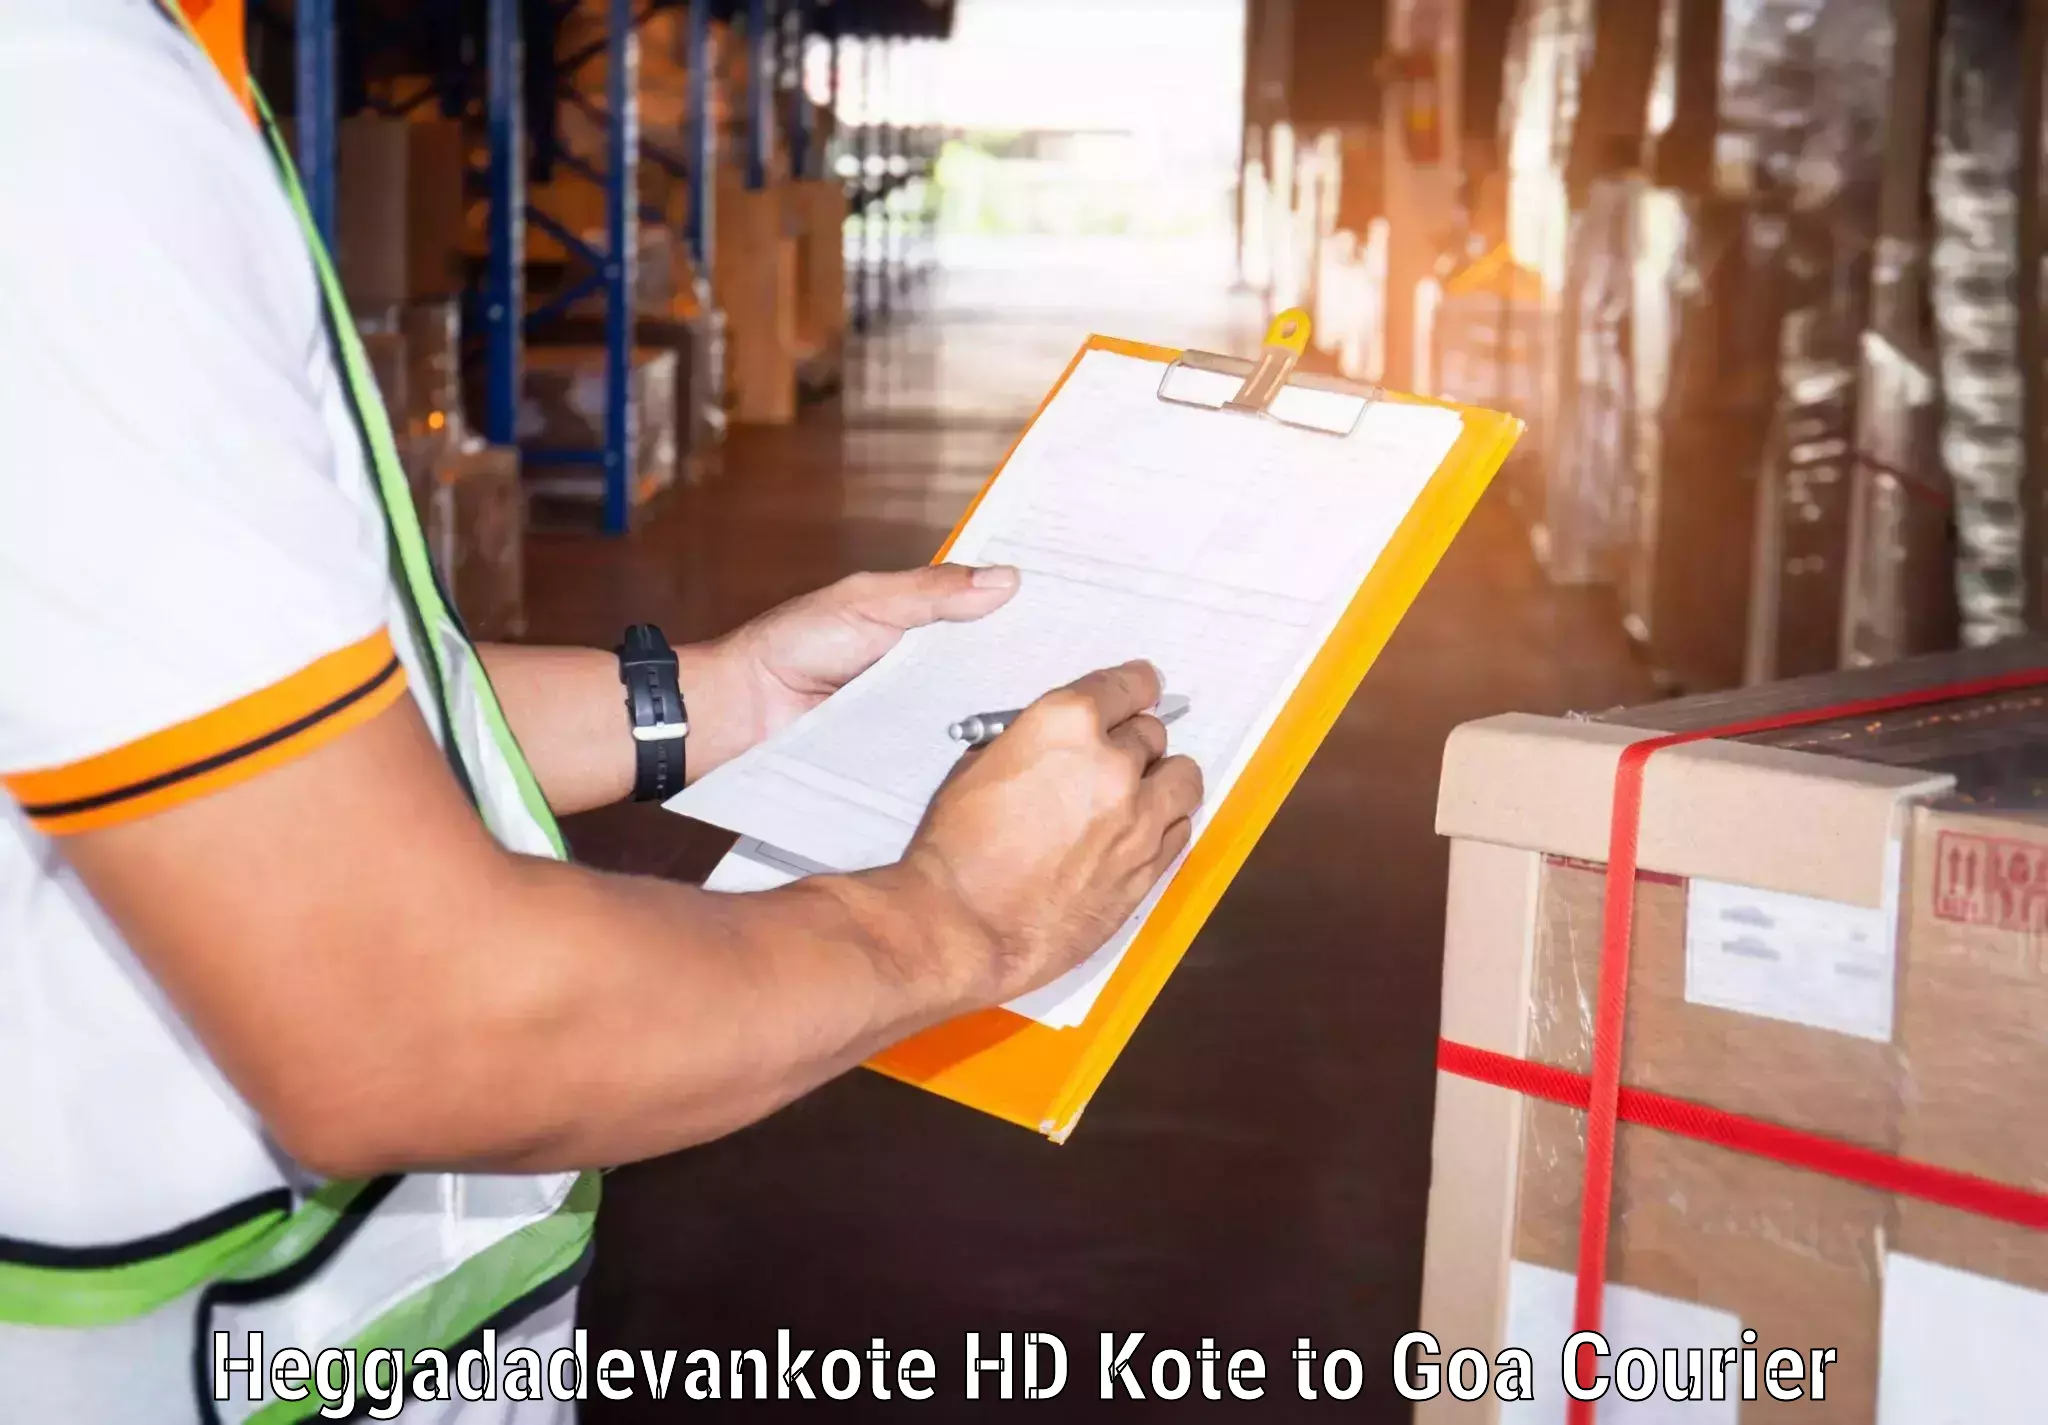 Track and trace shipping Heggadadevankote HD Kote to Sanvordem